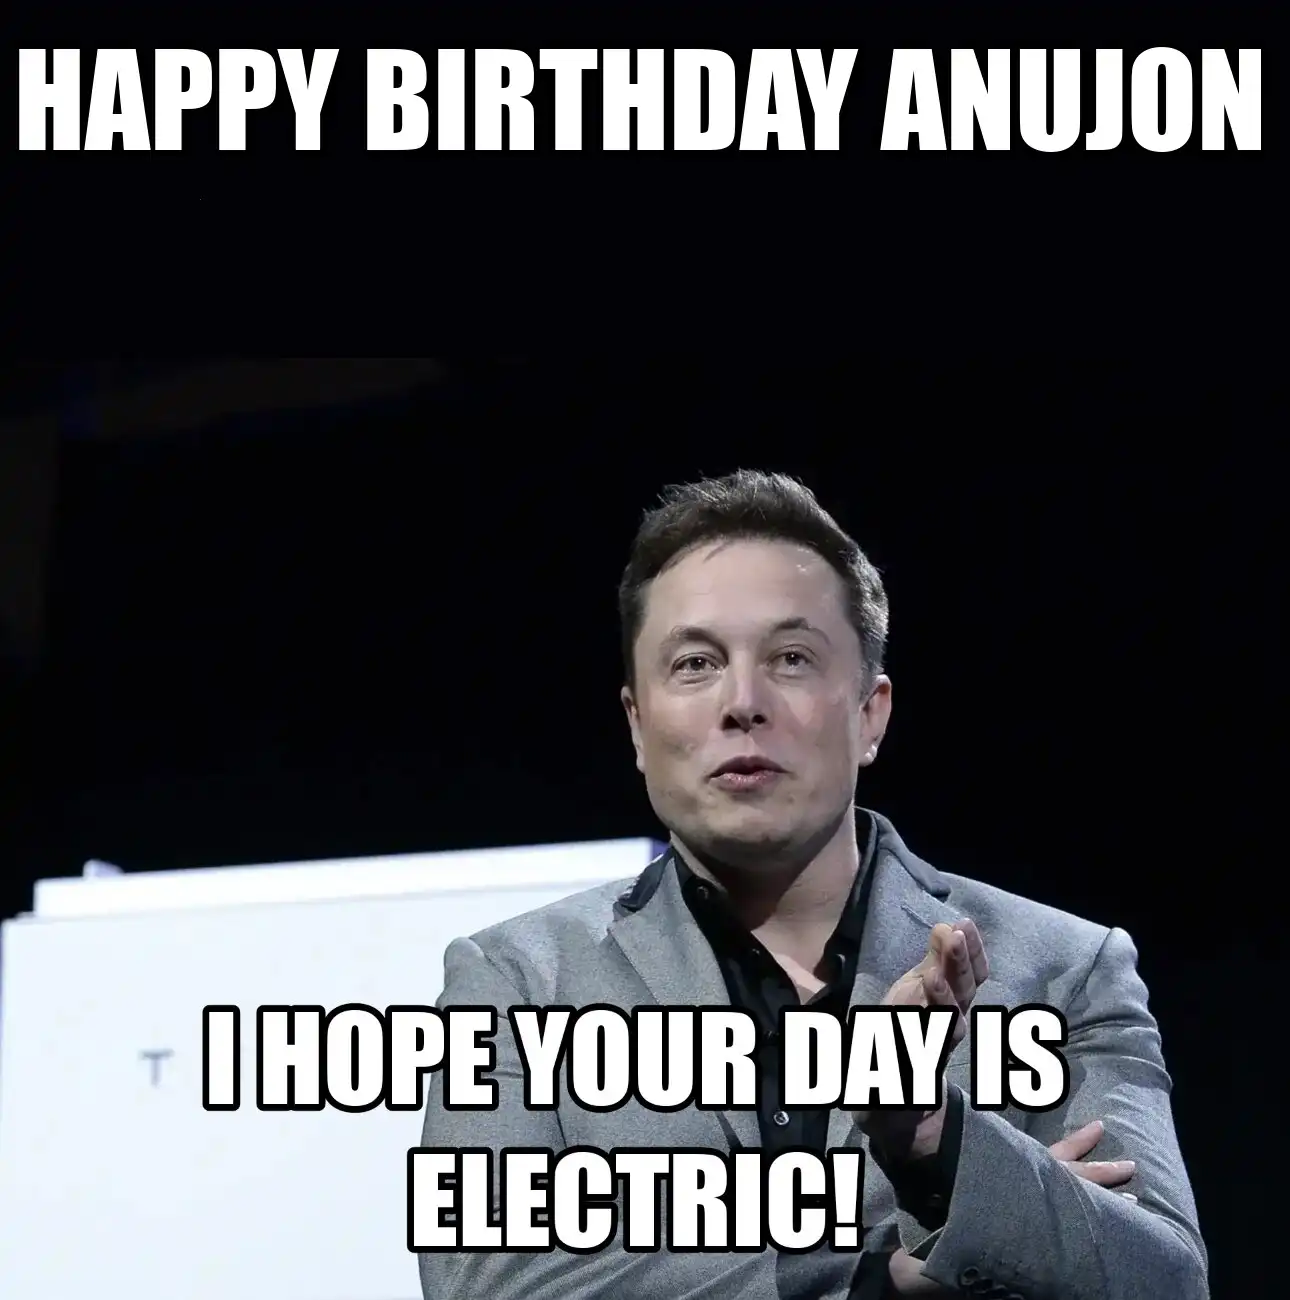 Happy Birthday Anujon I Hope Your Day Is Electric Meme